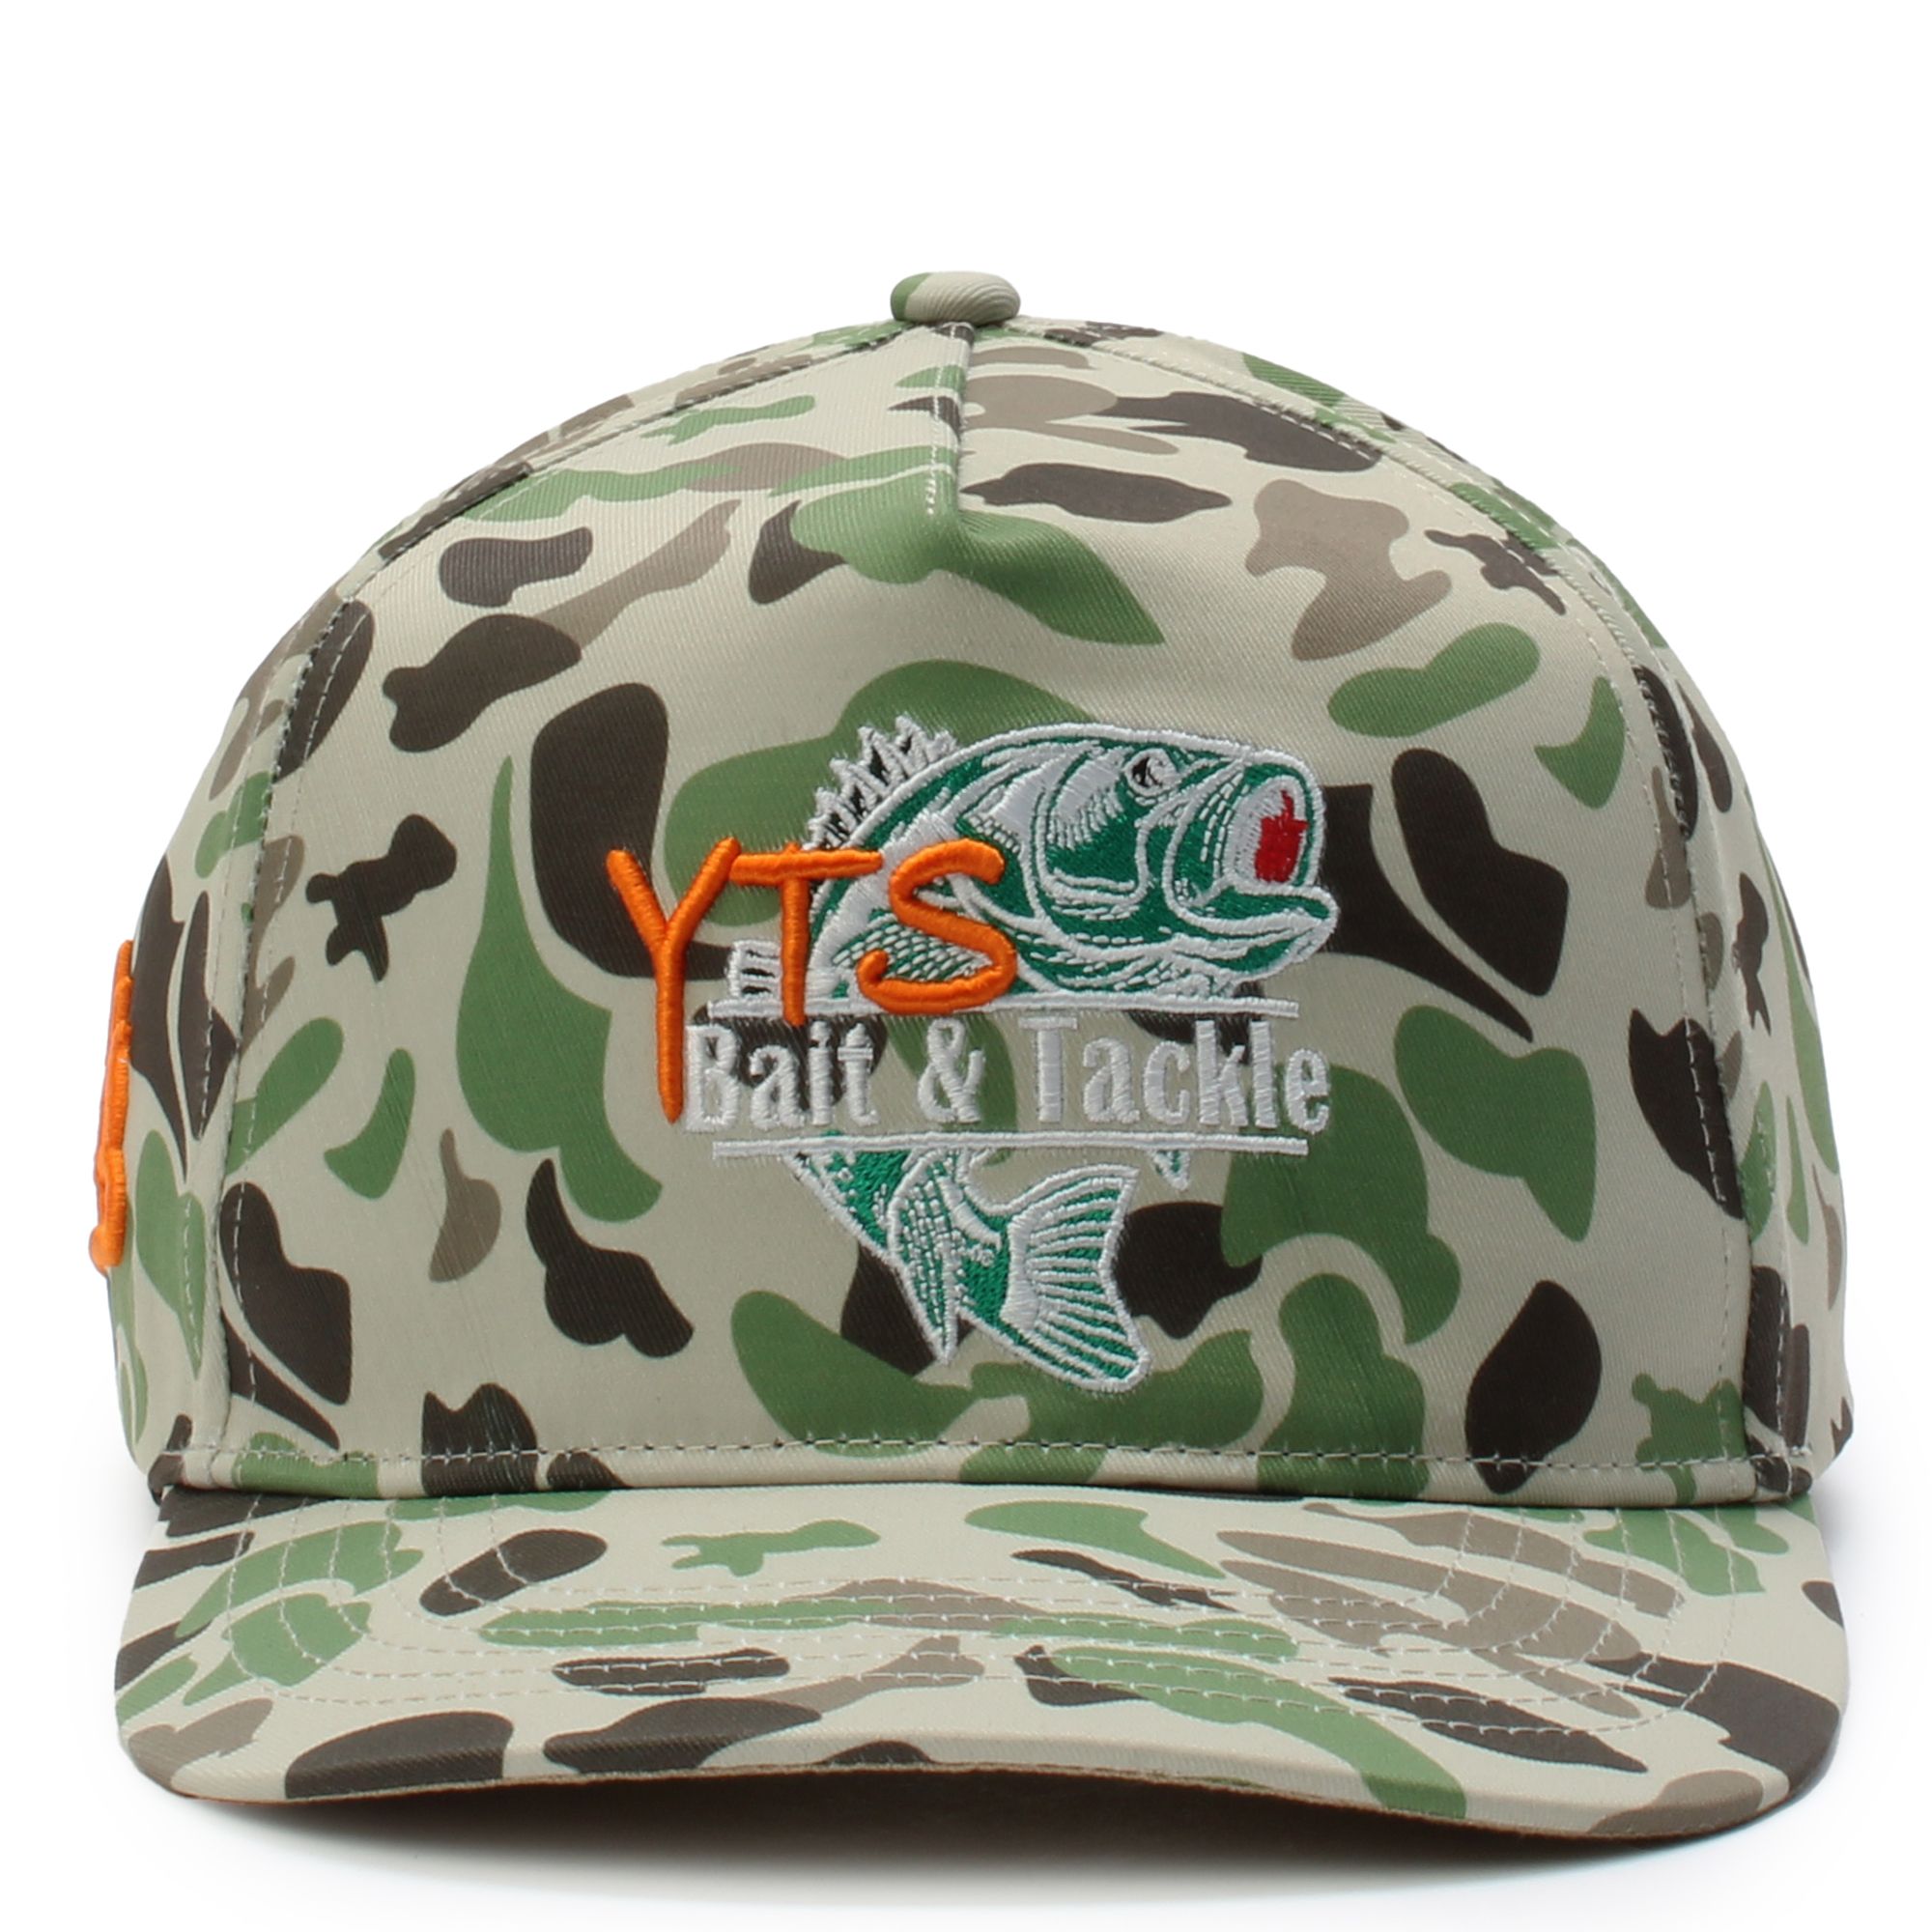 Your Team Sucks Bait and Tackle Trucker Hat Multi Color